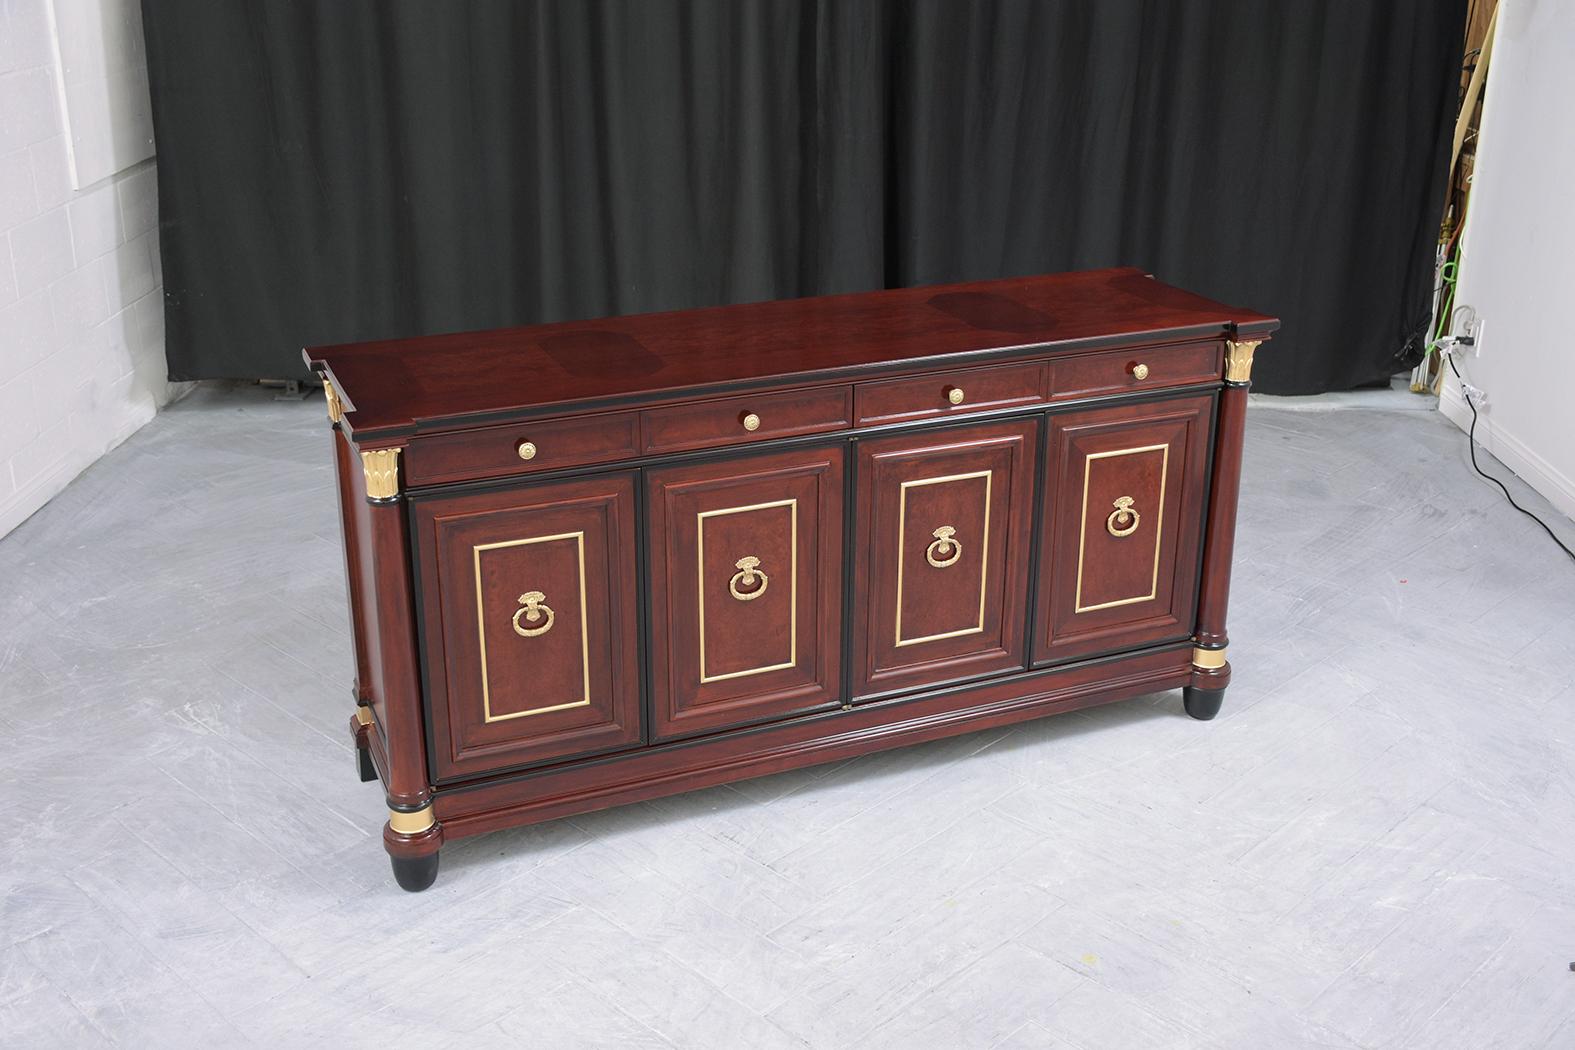 An extraordinary 1970s empire-style buffet in excellent condition is hand-crafted out of mahogany and is completely restored by our expert professional craftsmen team. This sideboard is eye-catching and features elegant mahogany color accentuated